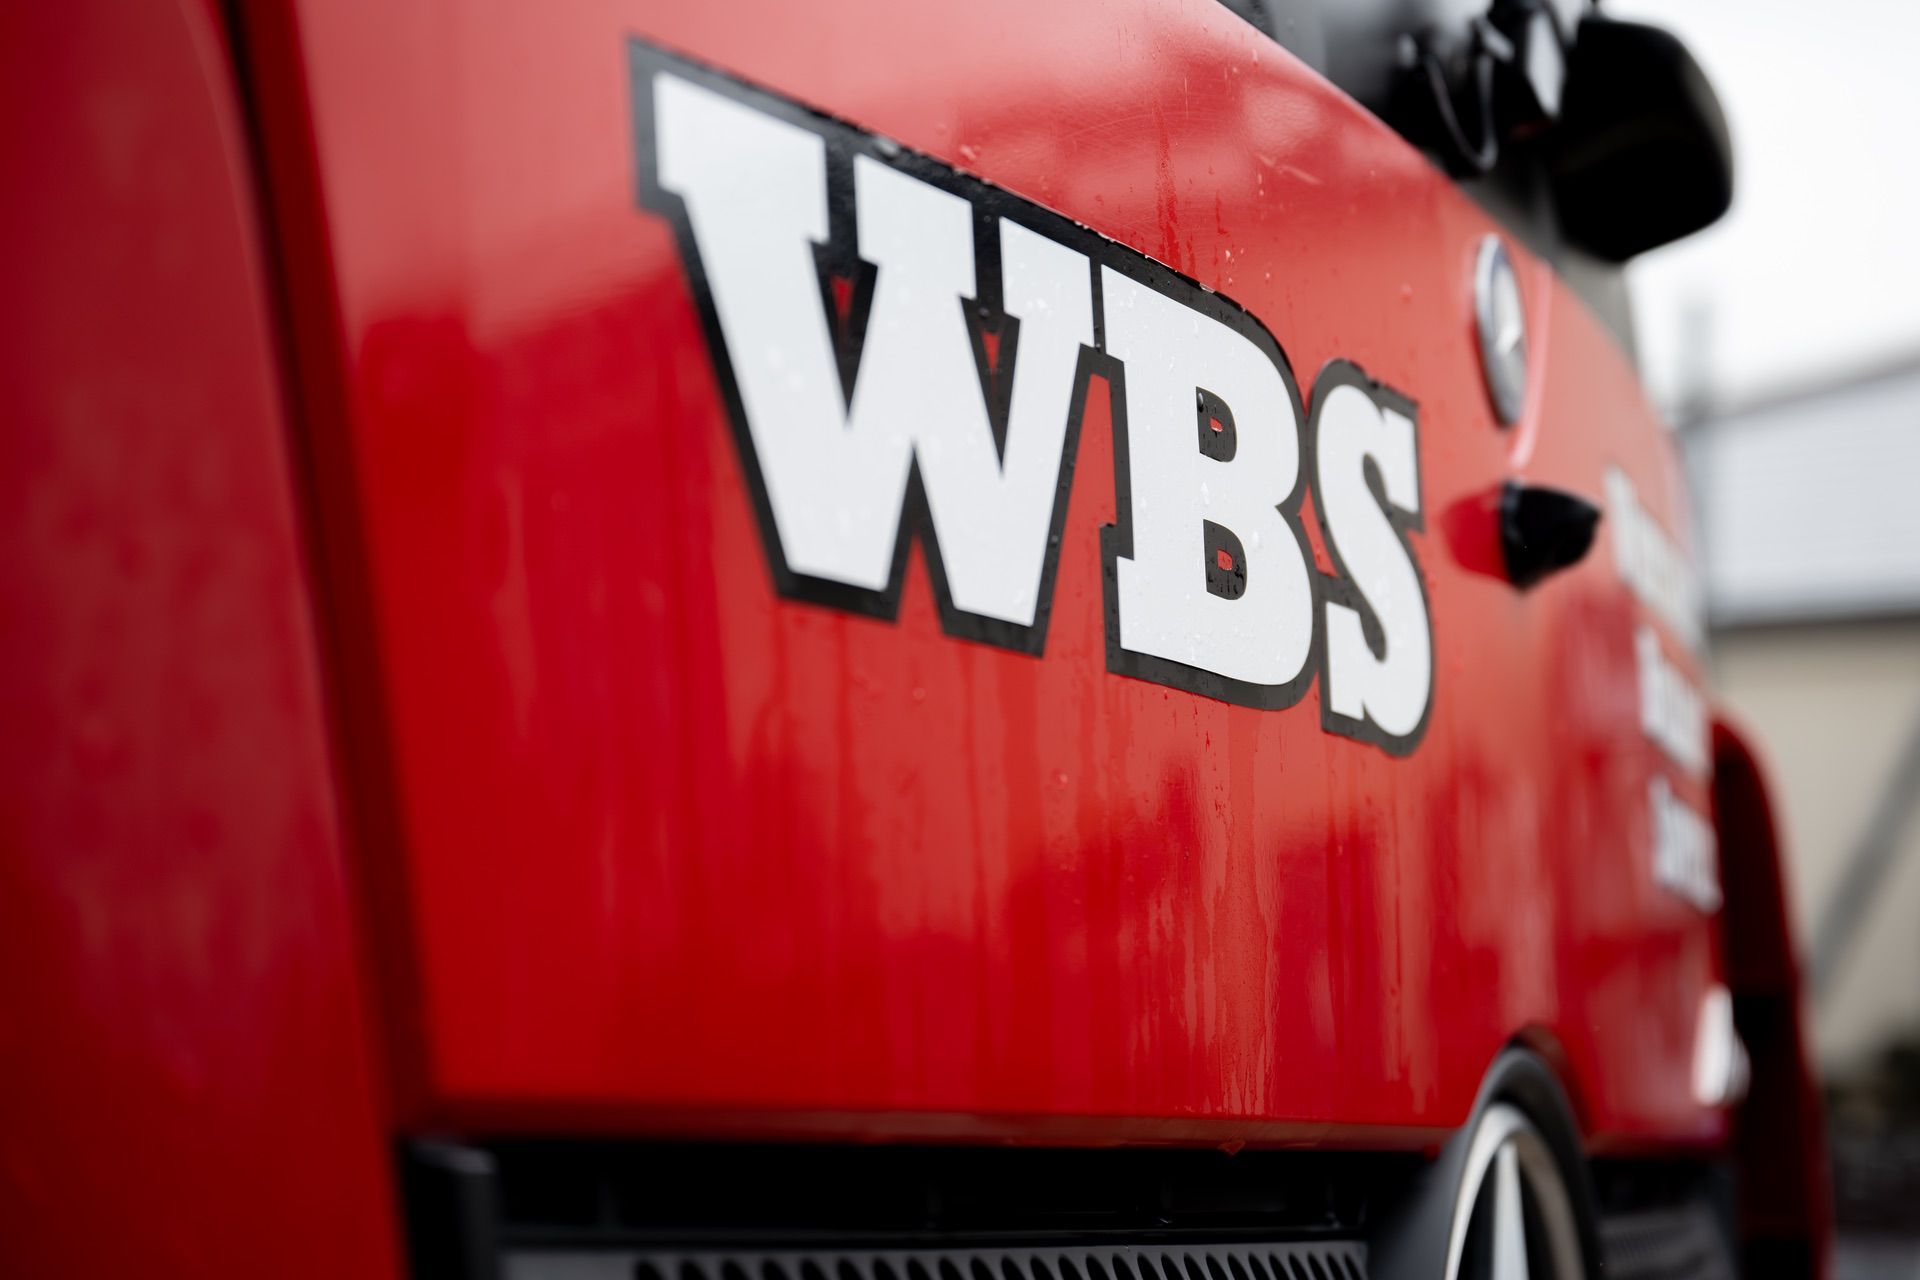 A close up of a red truck with the word wbs on it.